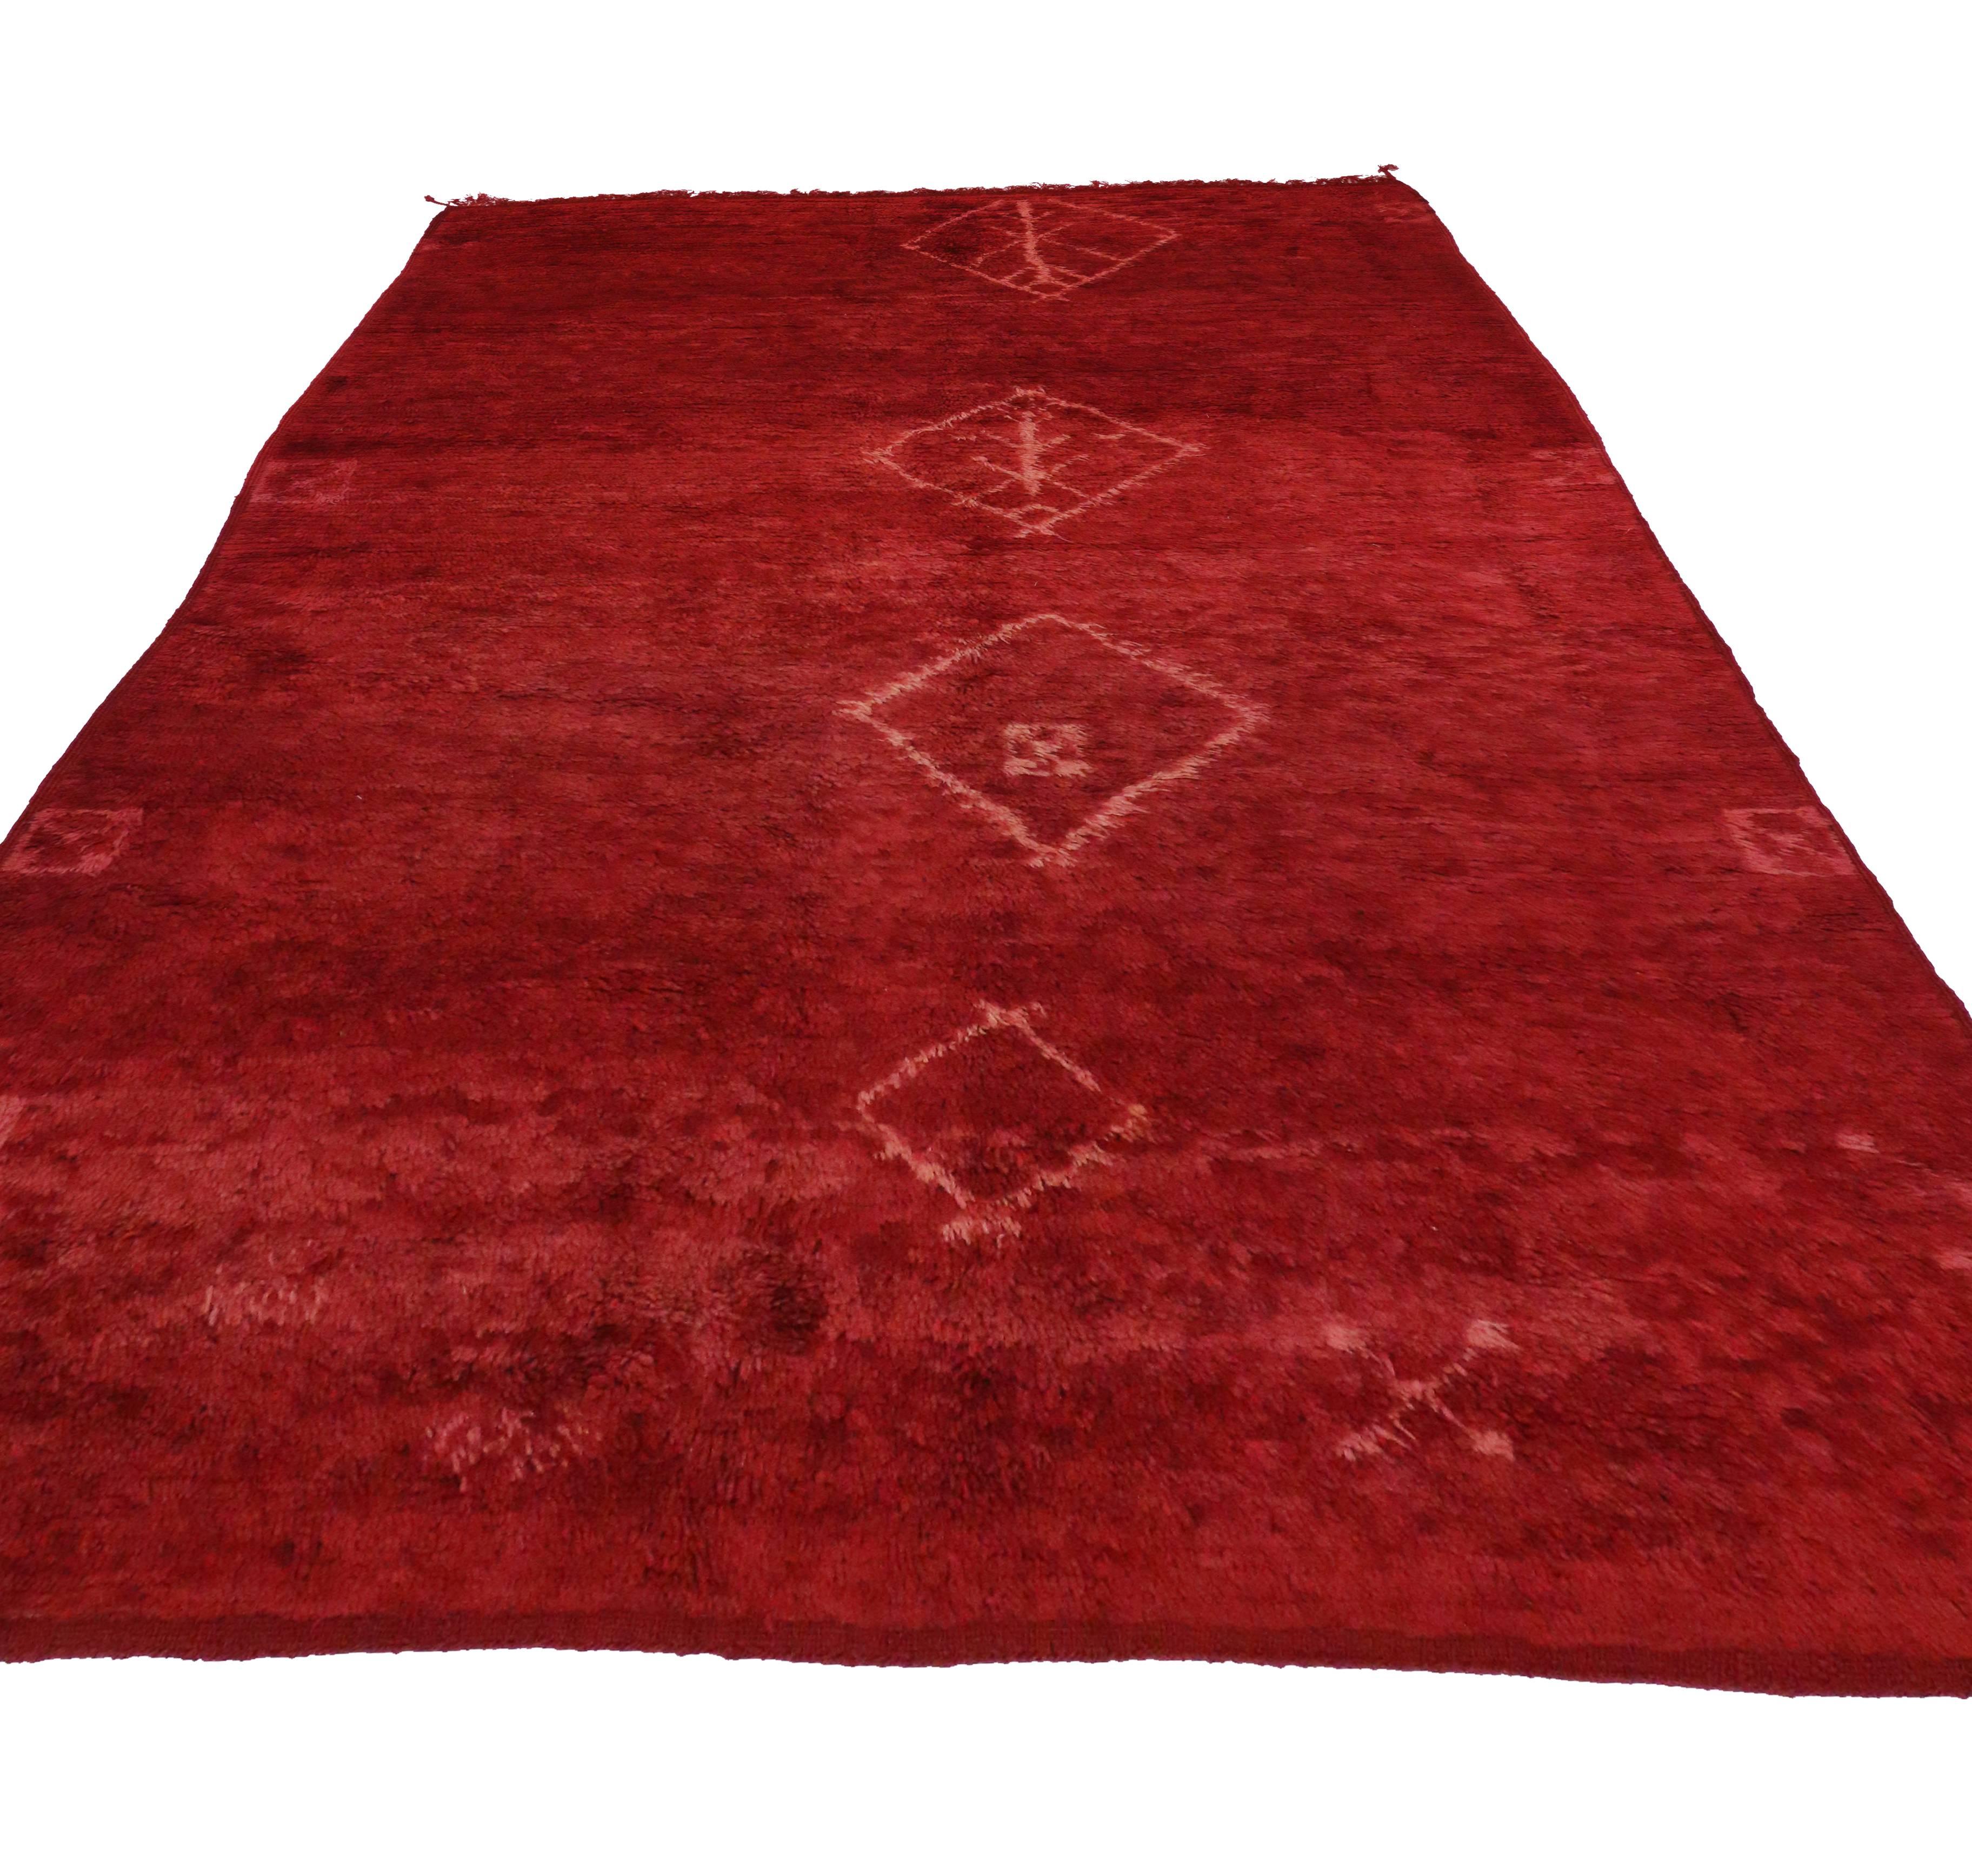 Wool Vintage Berber Red Moroccan Rug with Tribal Style